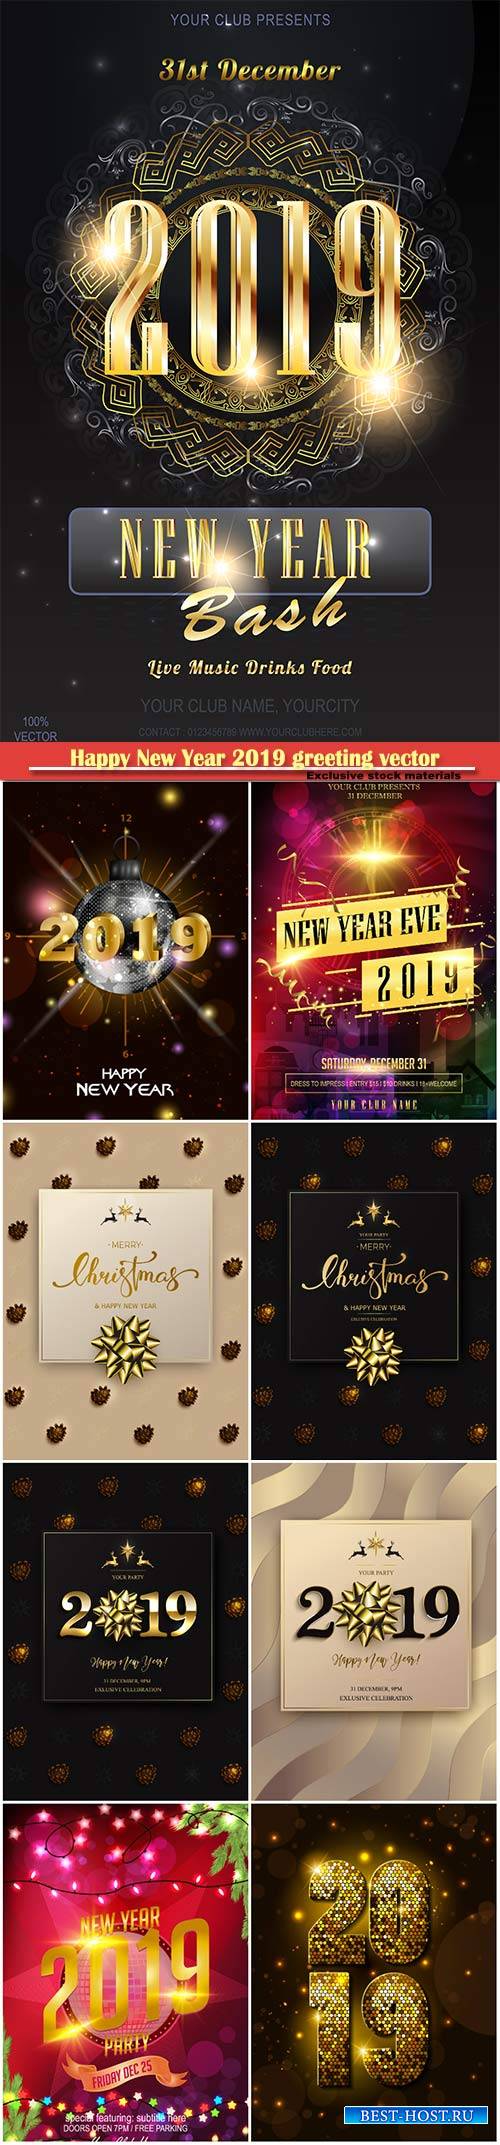 Happy New Year 2019 greeting vector background